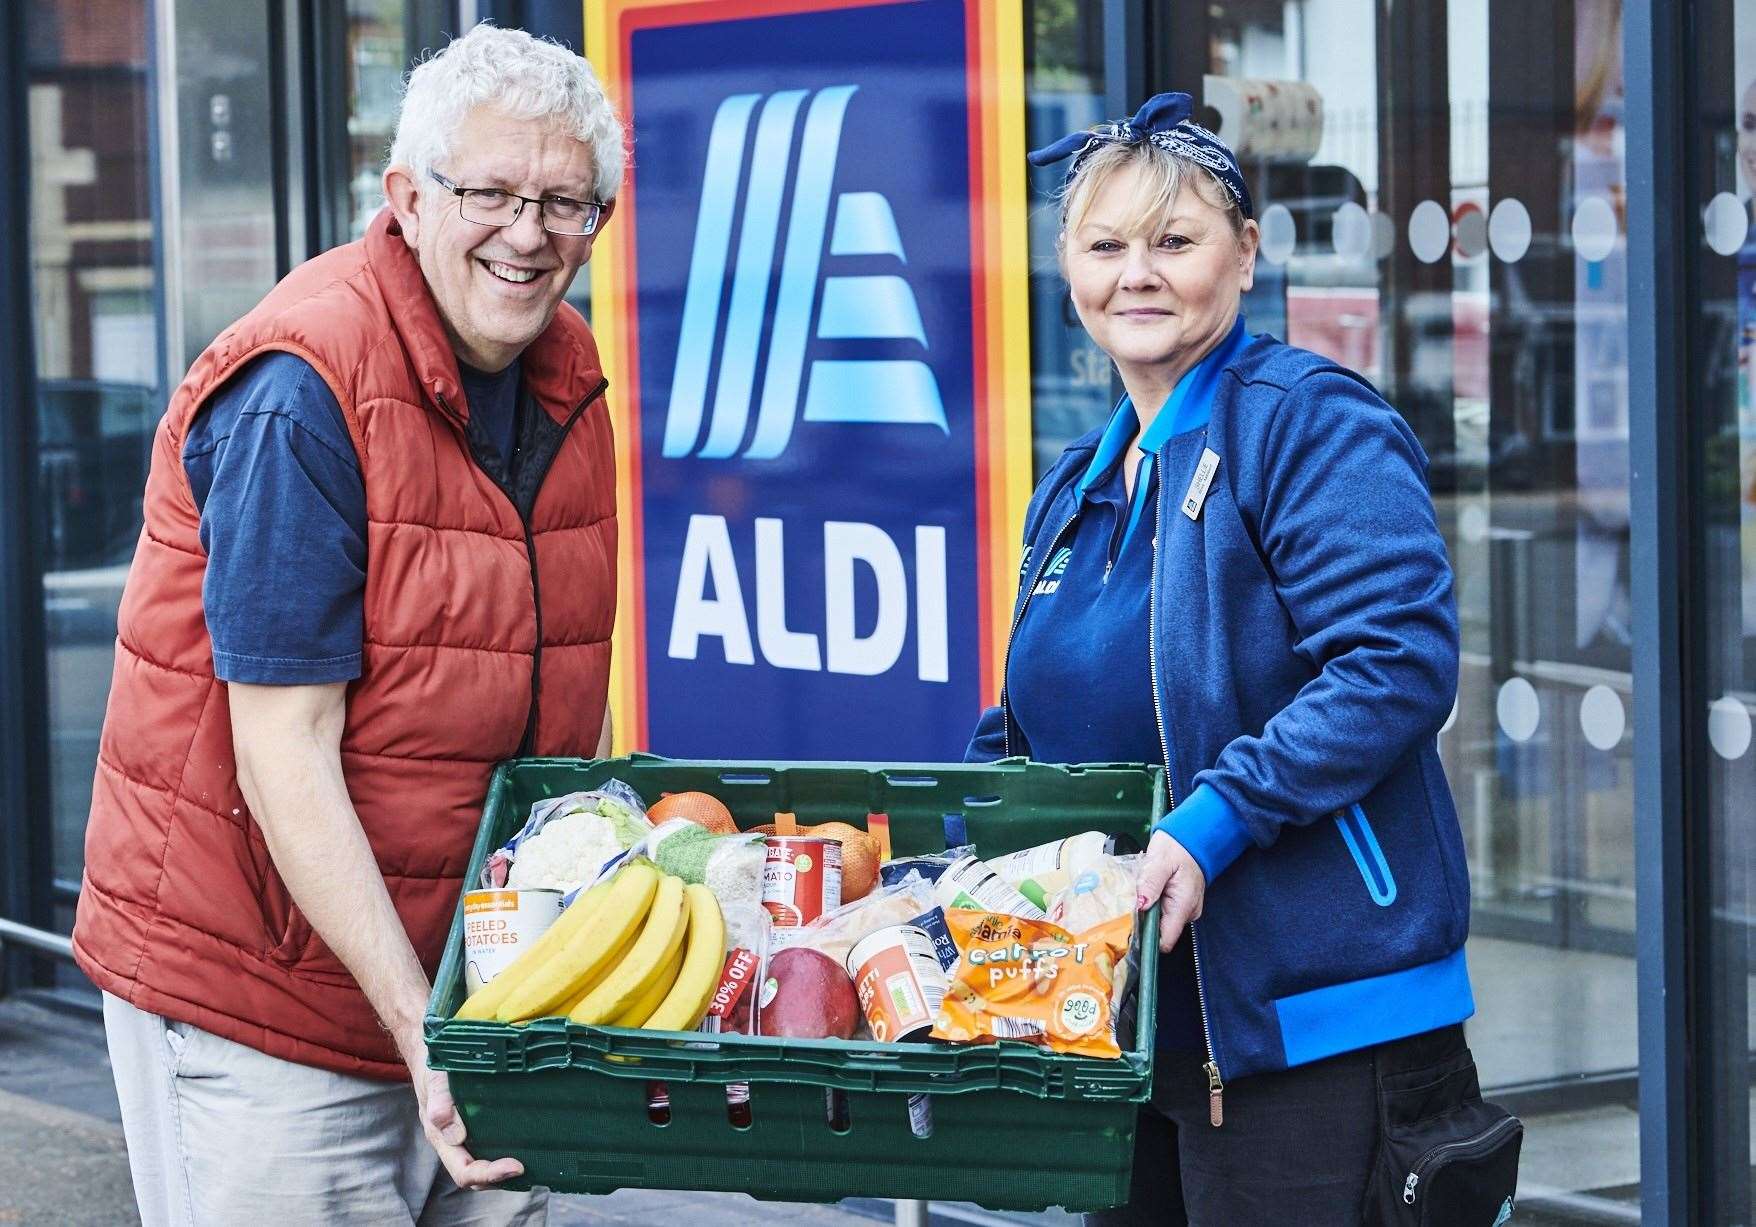 Charities and community groups can apply to Aldi now to collect food at Christmas